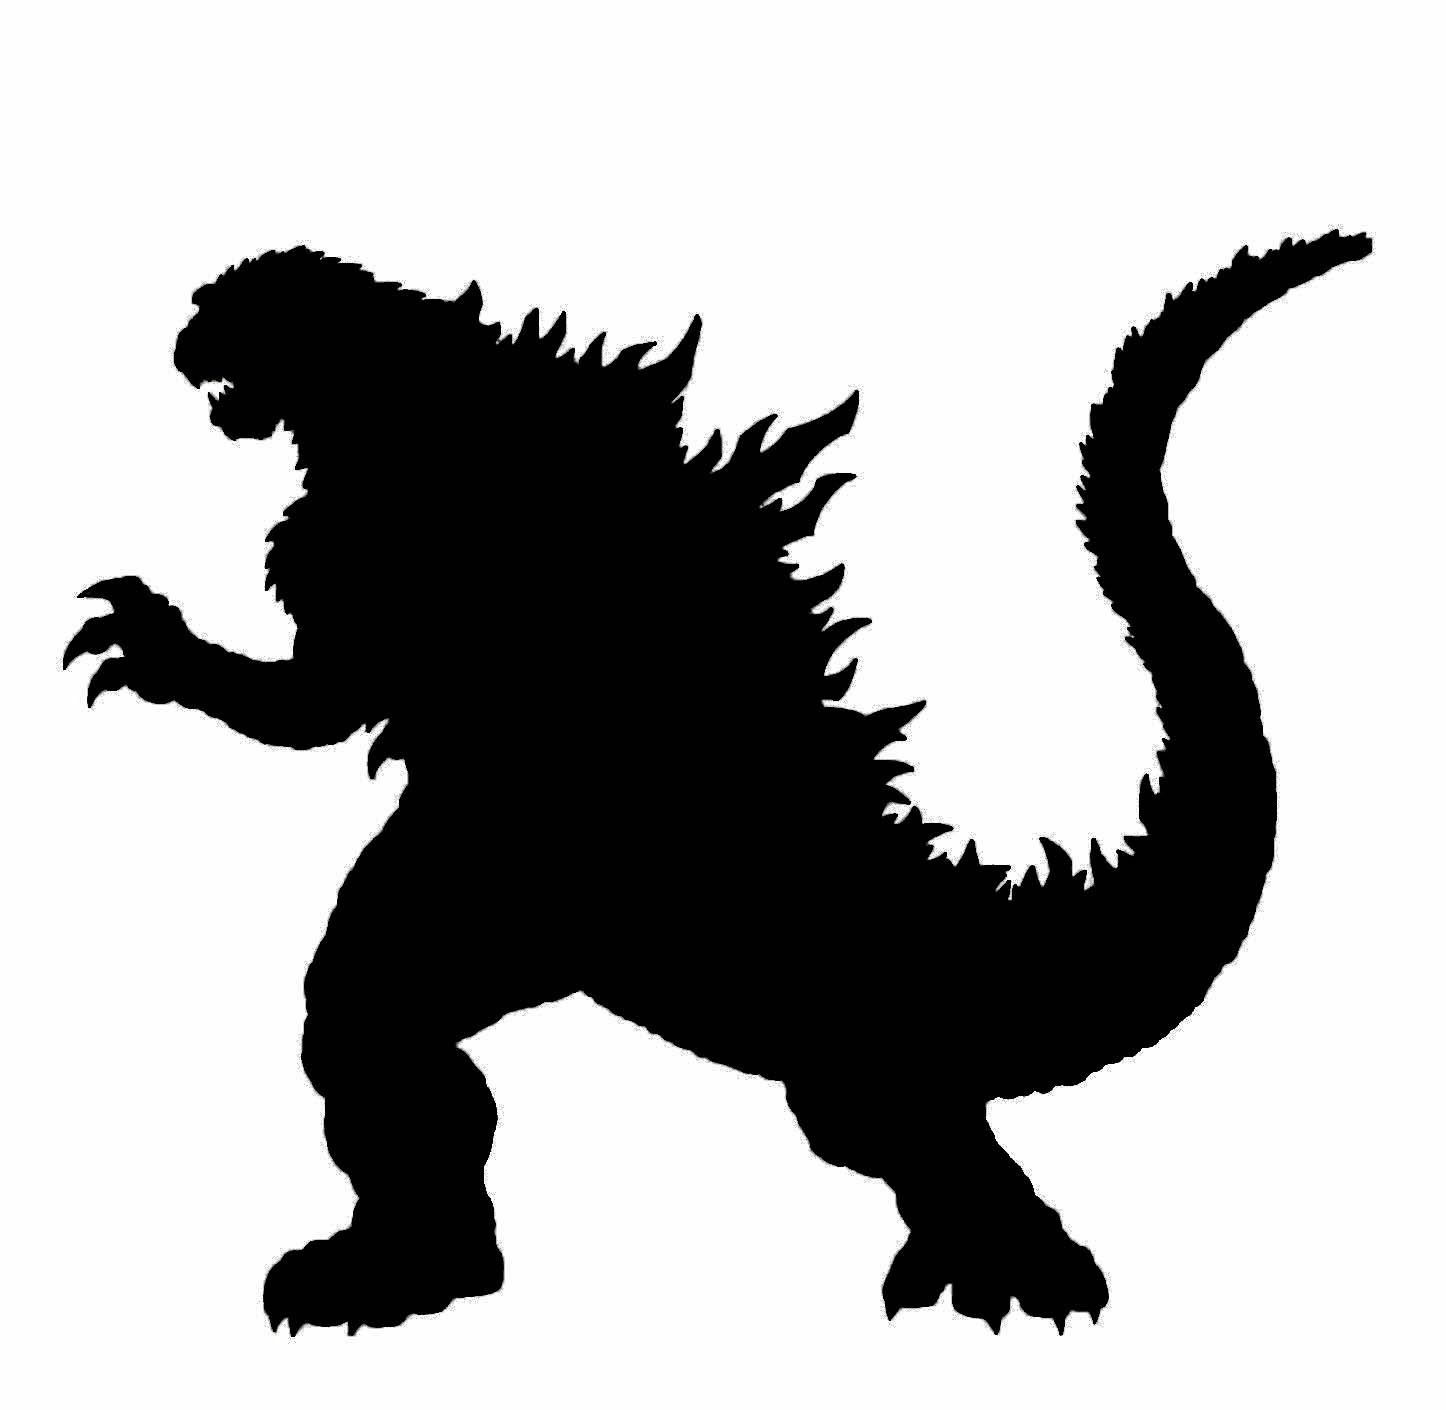 godzilla silloettes | . ClipartLook.com that we could use and transform into silhouettes  to